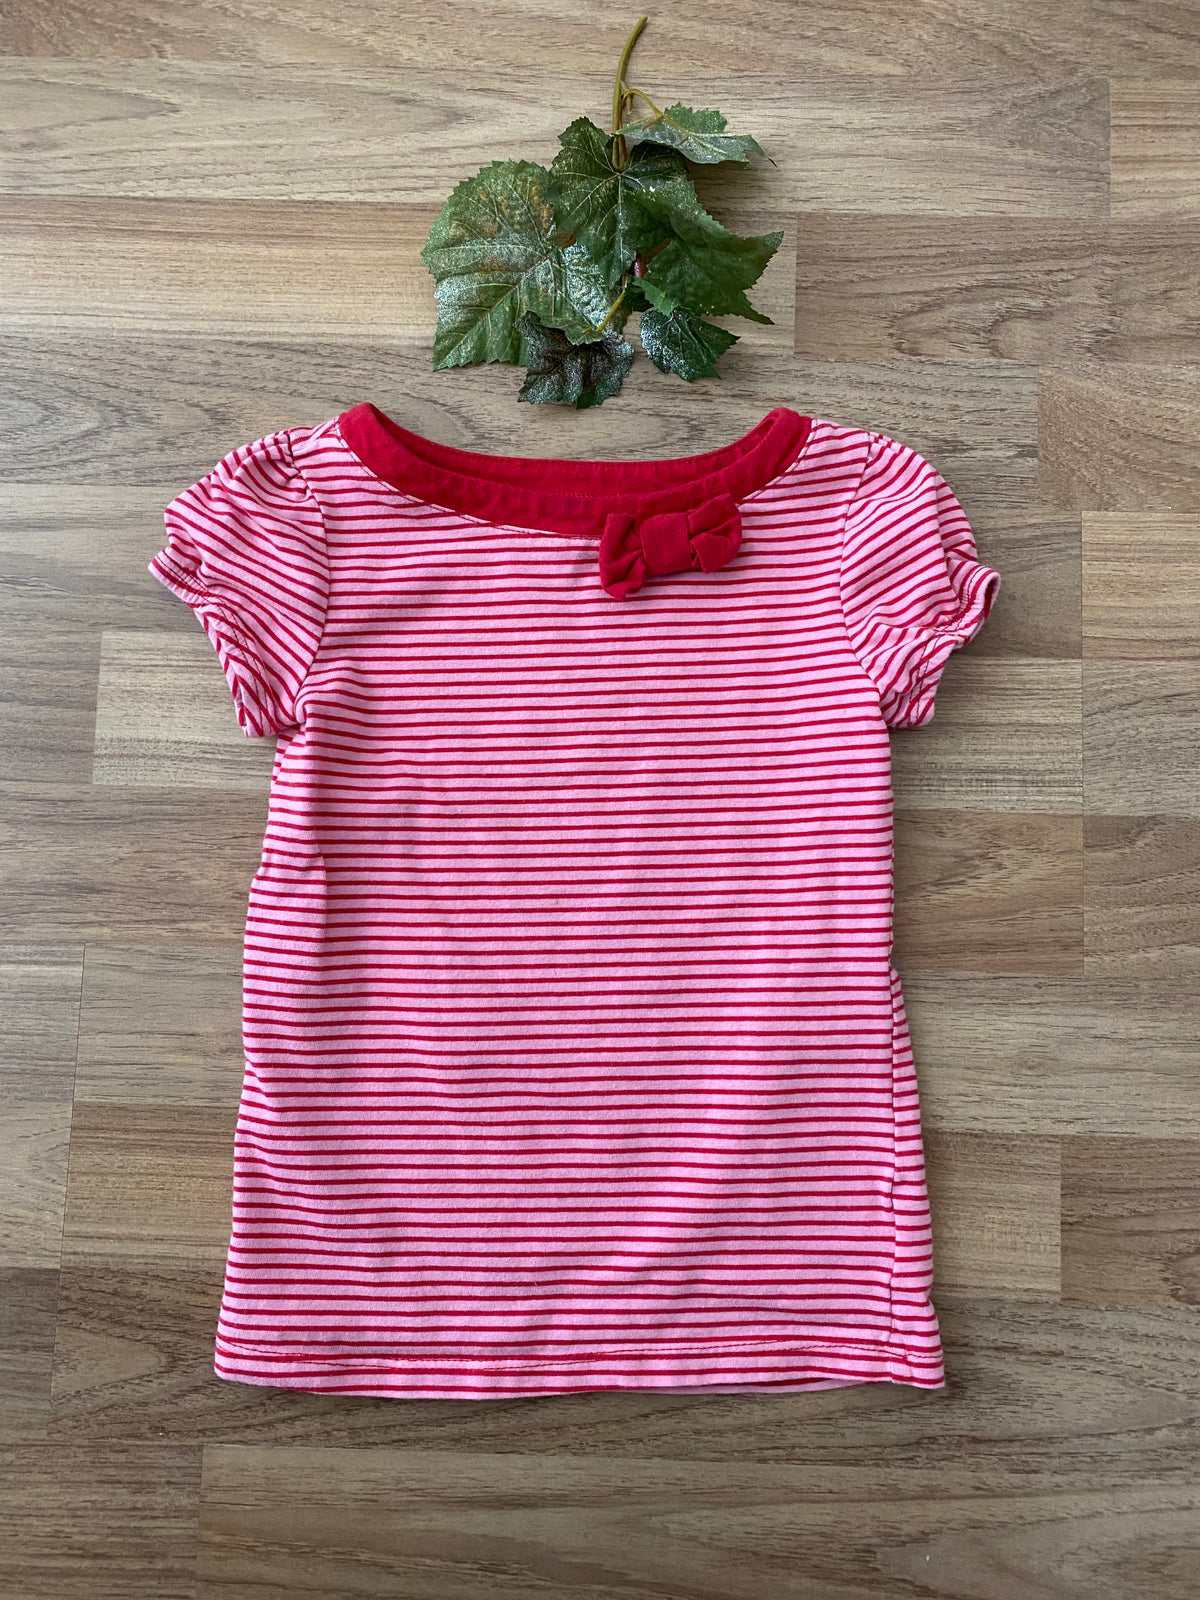 Short Sleeve striped Top (Girls Size 3)